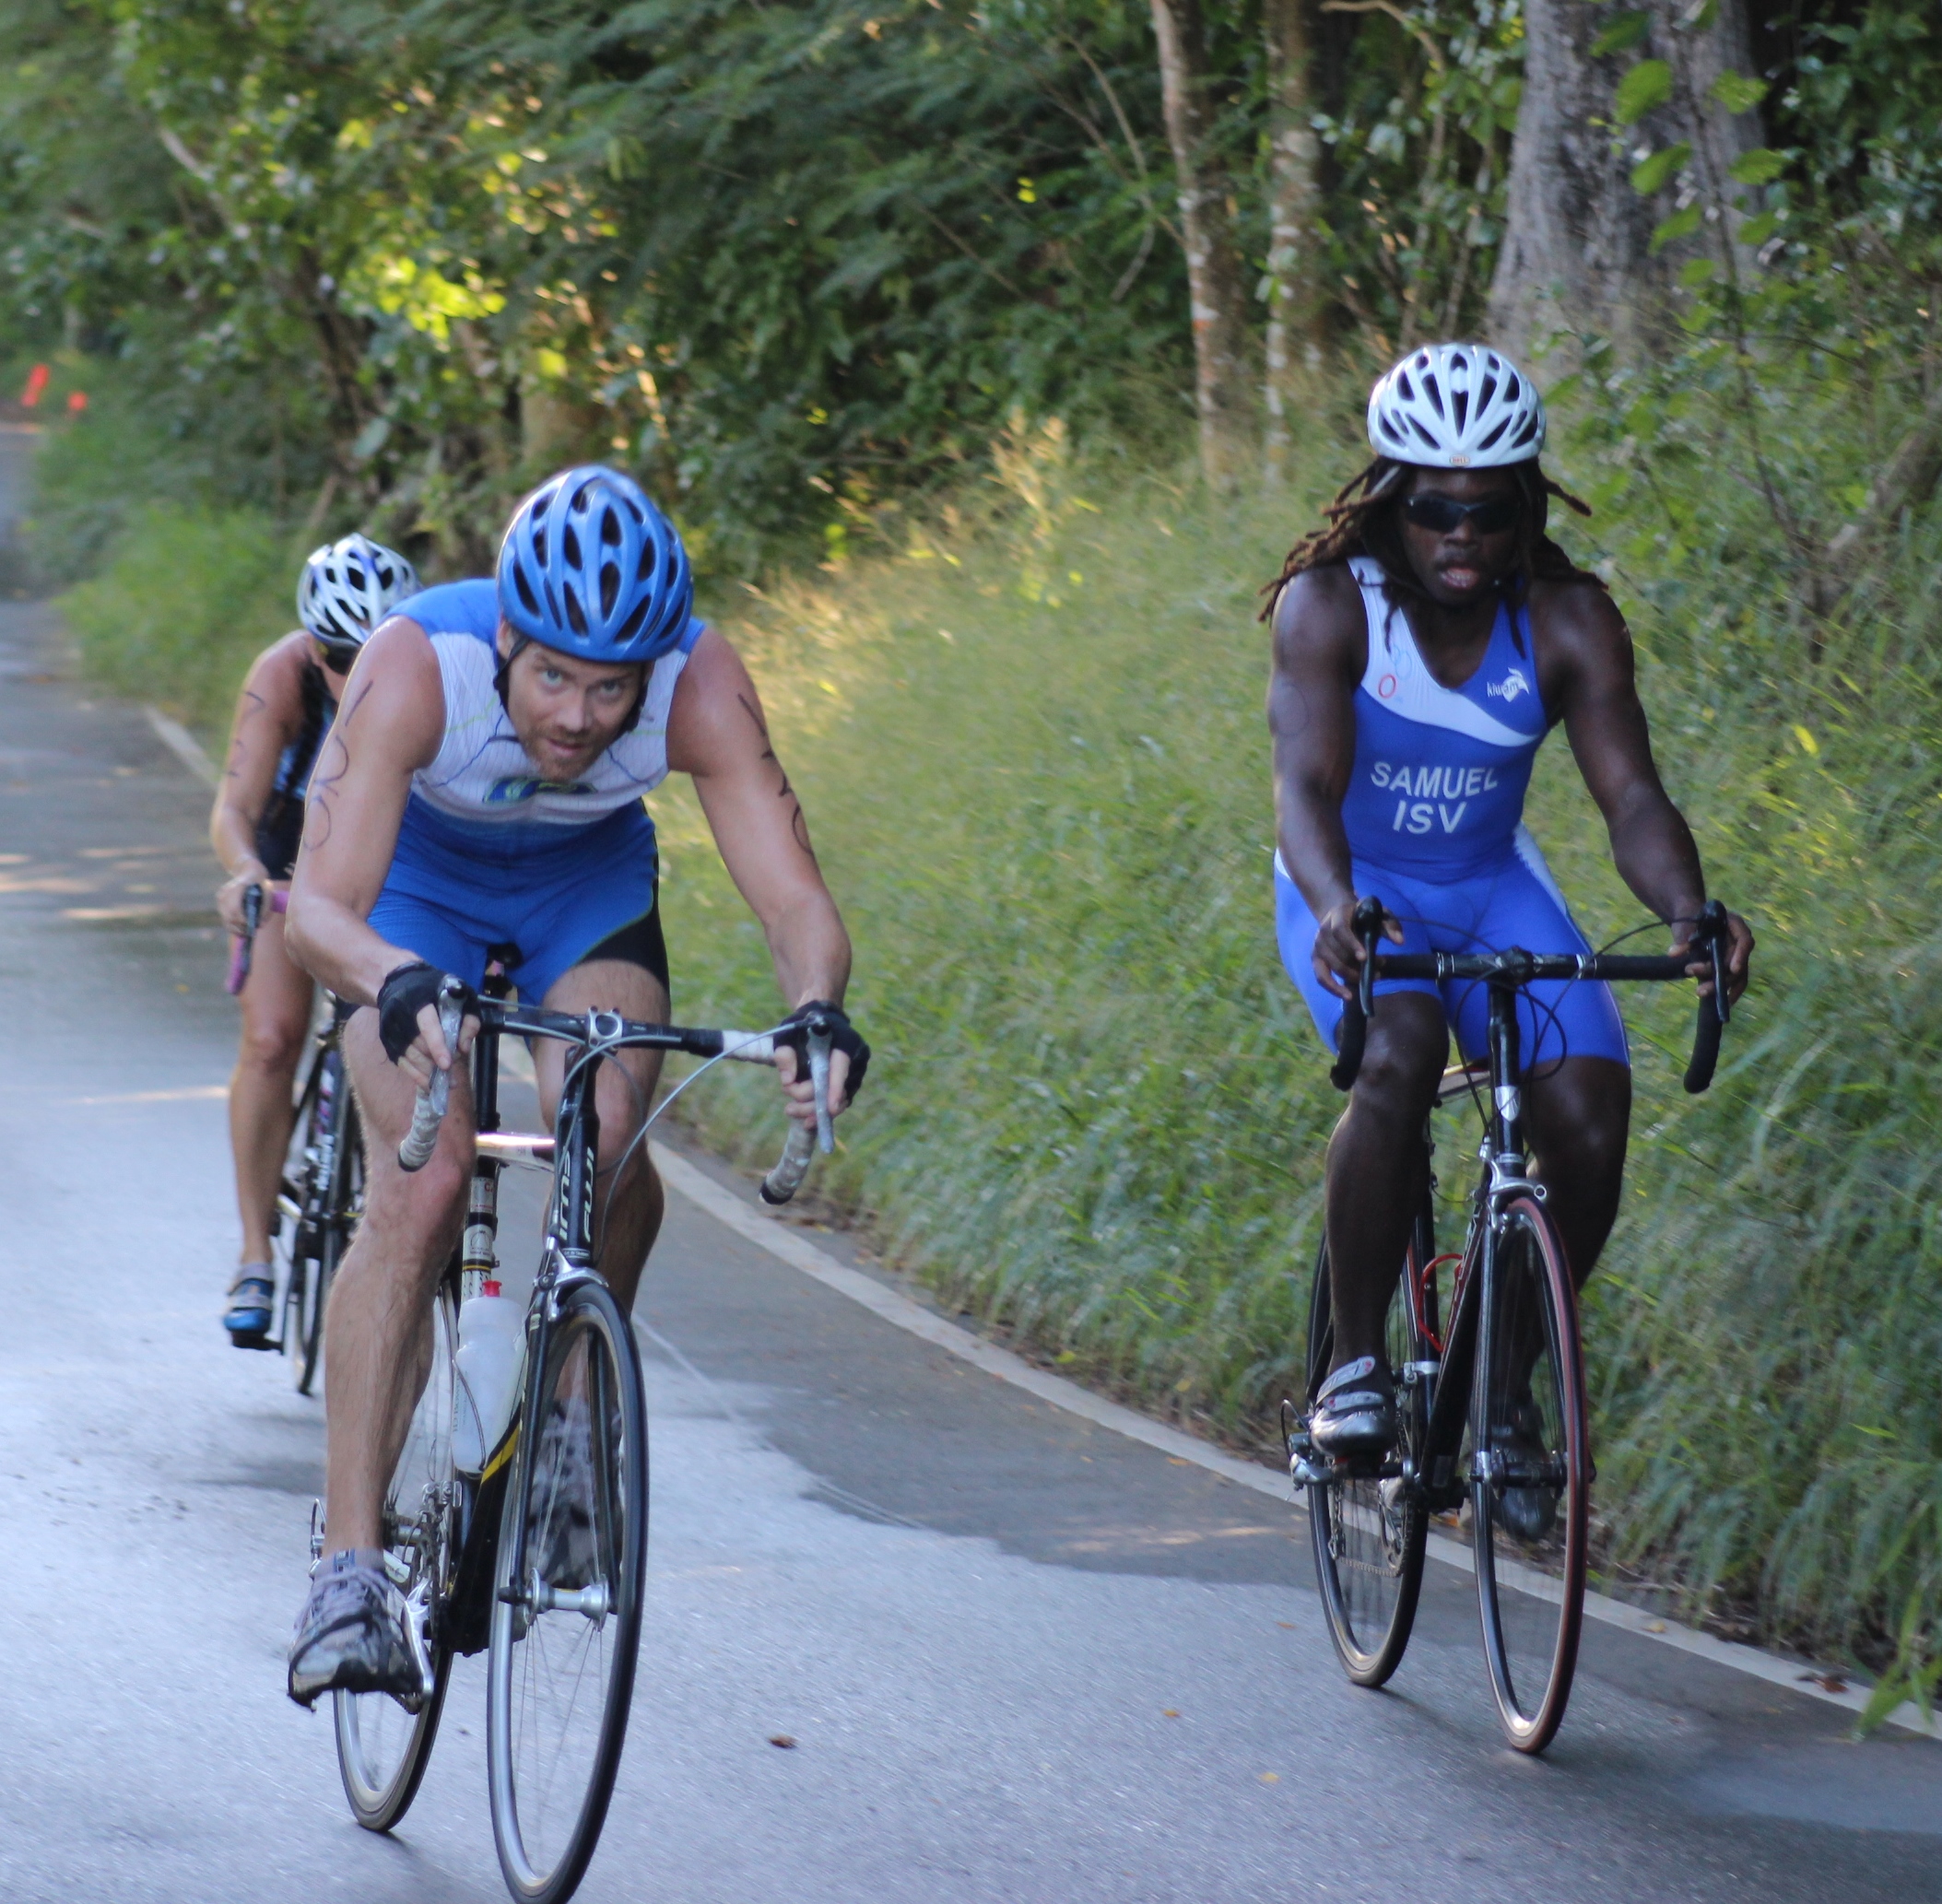 Jason Snow and Lukata Samuel on the bike course (photo by Roger Hatfield).